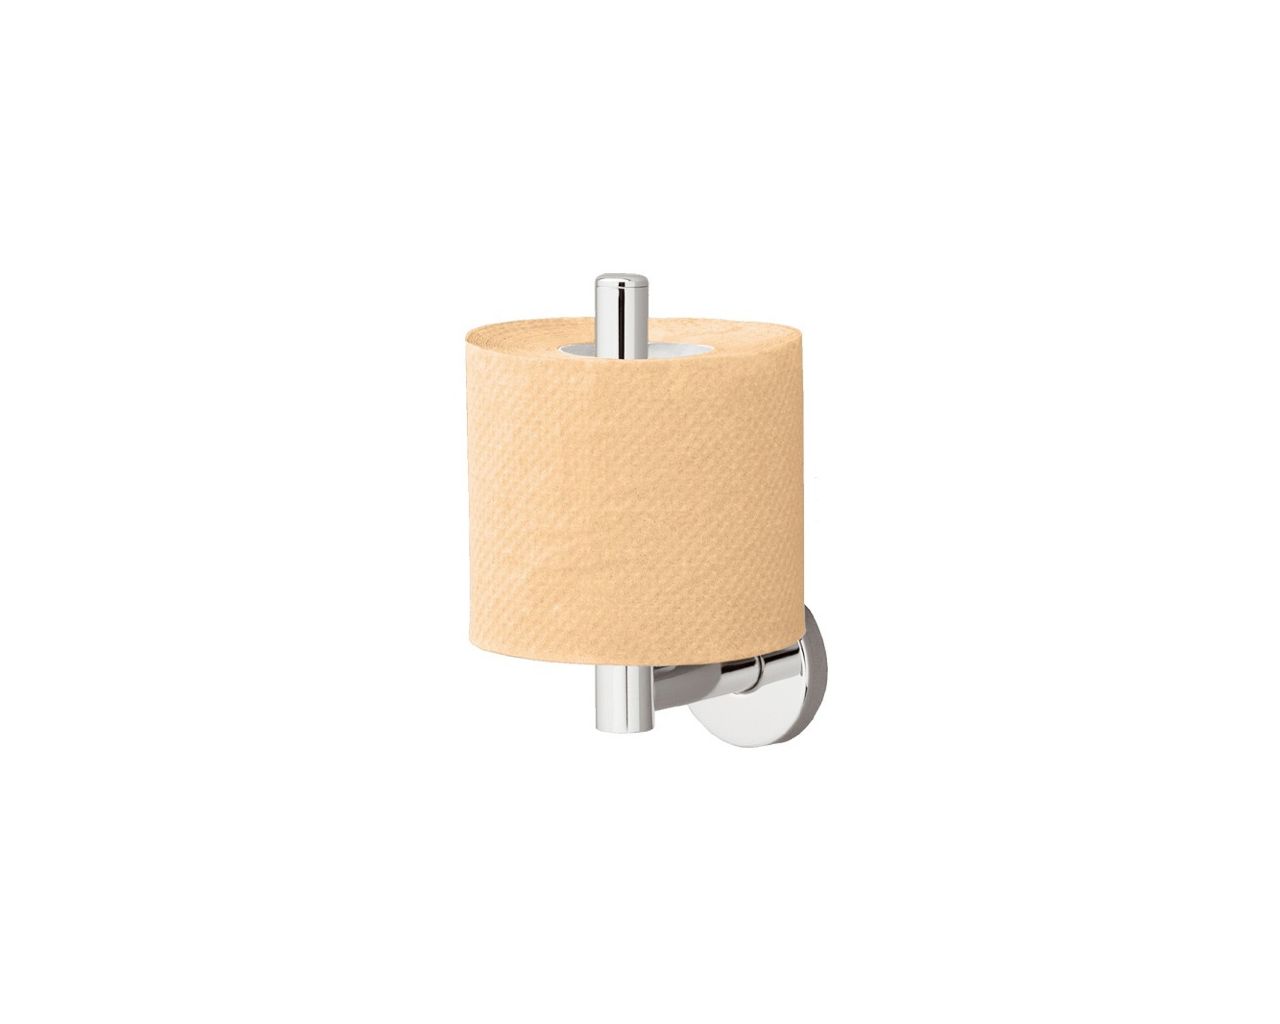 Upright holder for extra toilet roll, made of chrome plated brass (polished version)